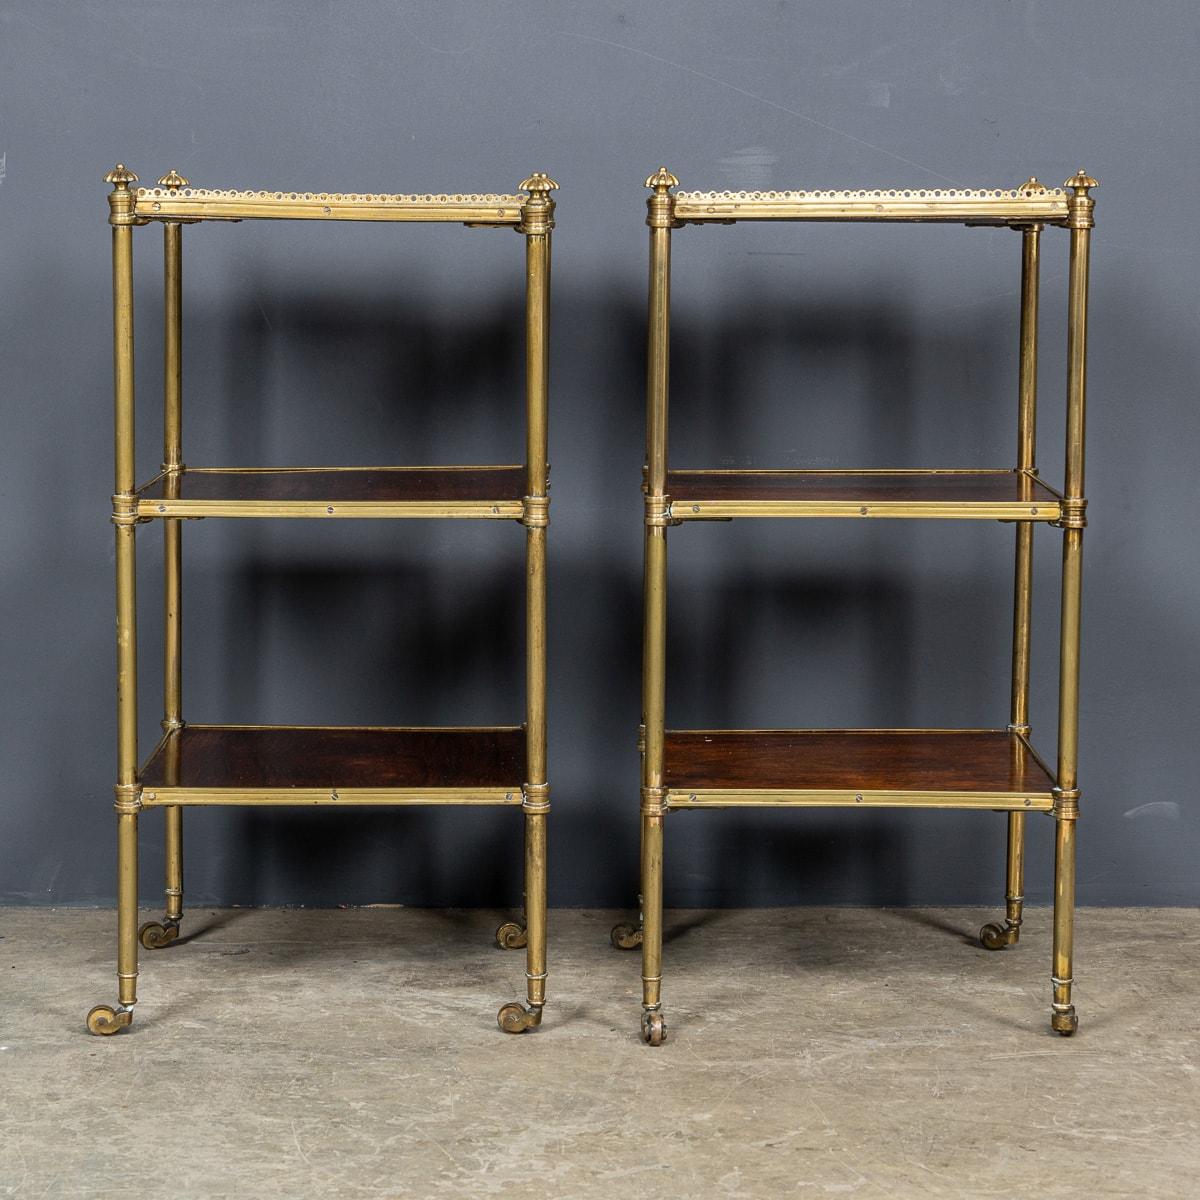 Regency Pair Of Antique 19th Century Rosewood & Brass Three Tier Etageres c.1820 For Sale